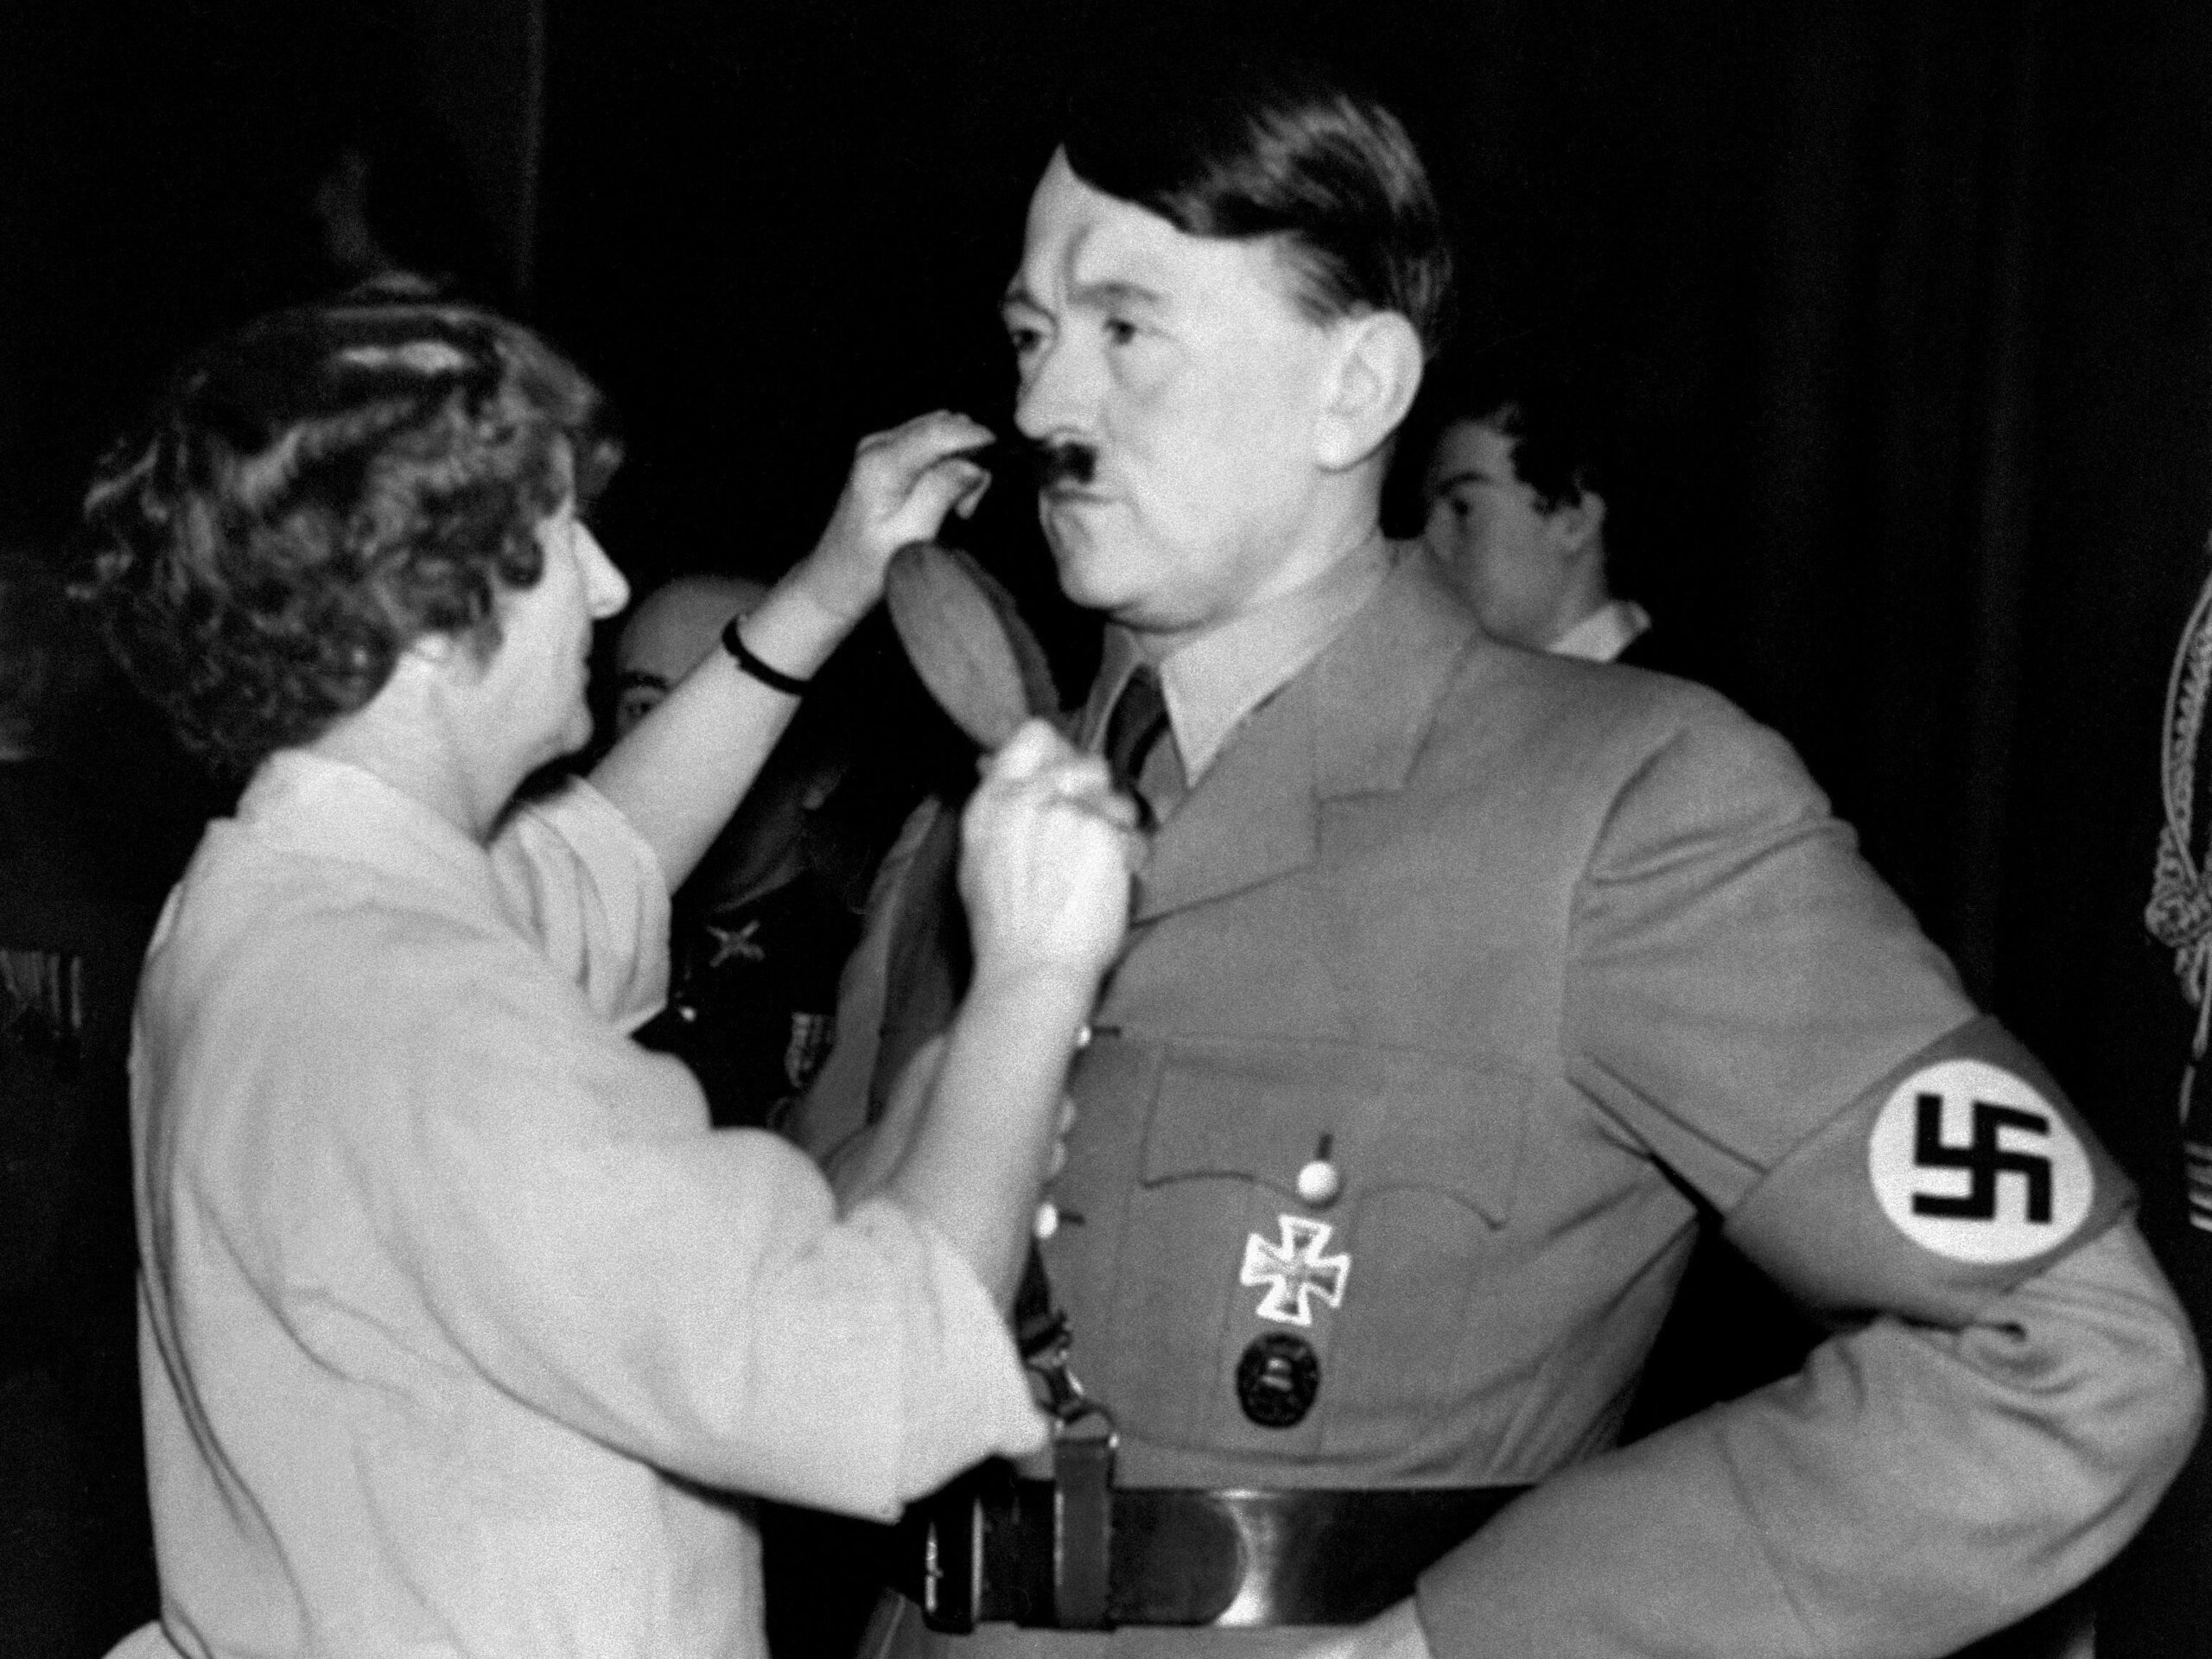 A picture taken on November 24, 1938 shows the wax figure of German Nazi Chancellor Adolf Hitler having his moustache combed by a hairdresser at Madame Tussauds Wax museum in London.